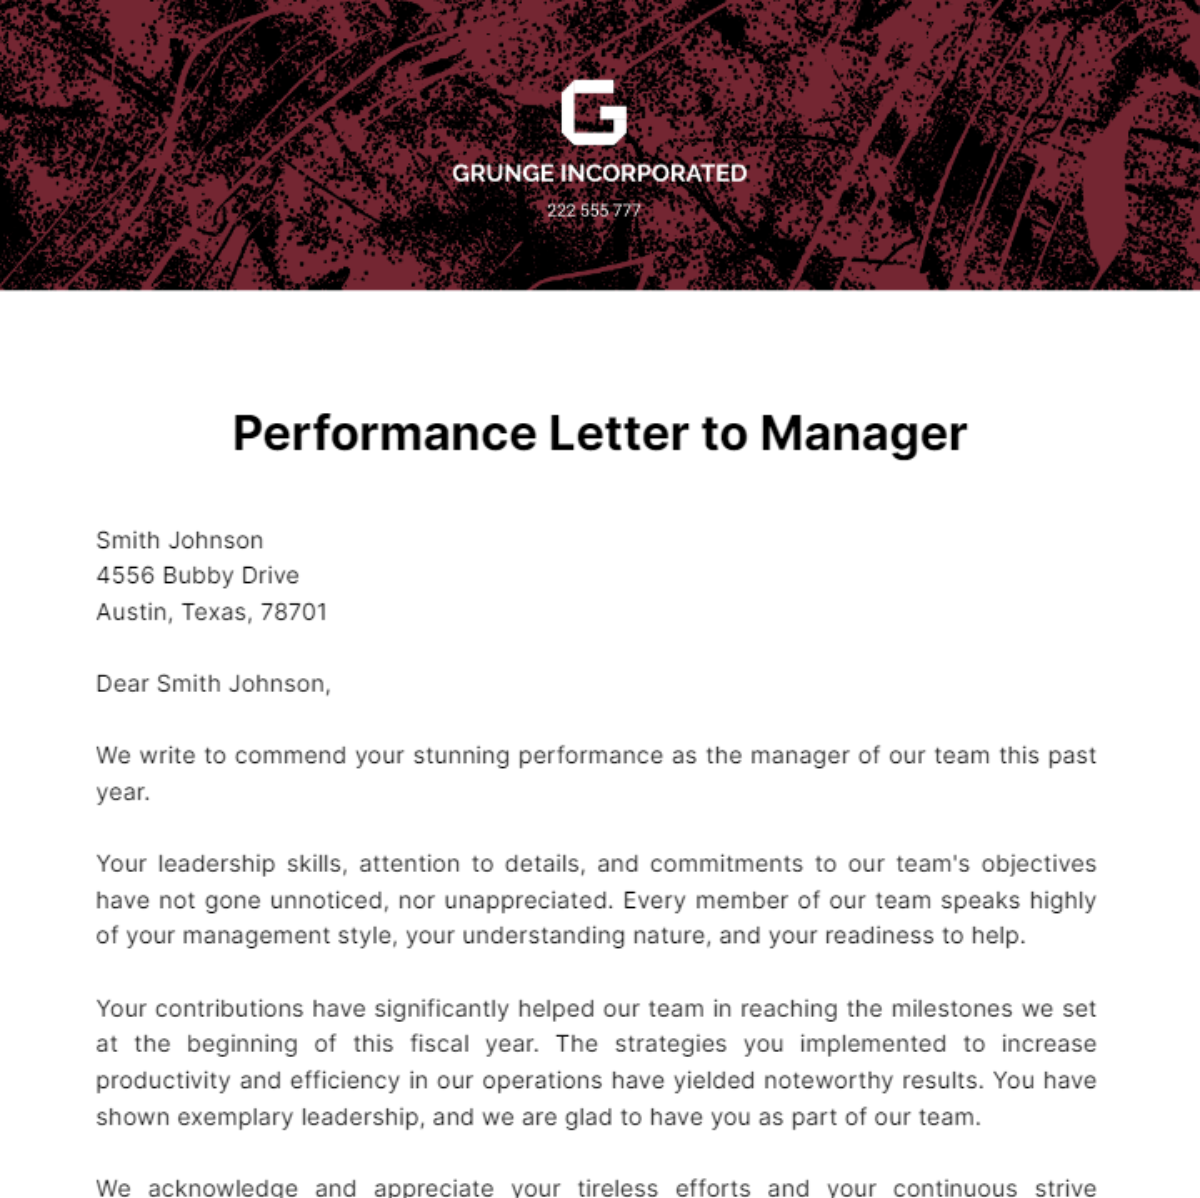 Performance Letter to Manager Template